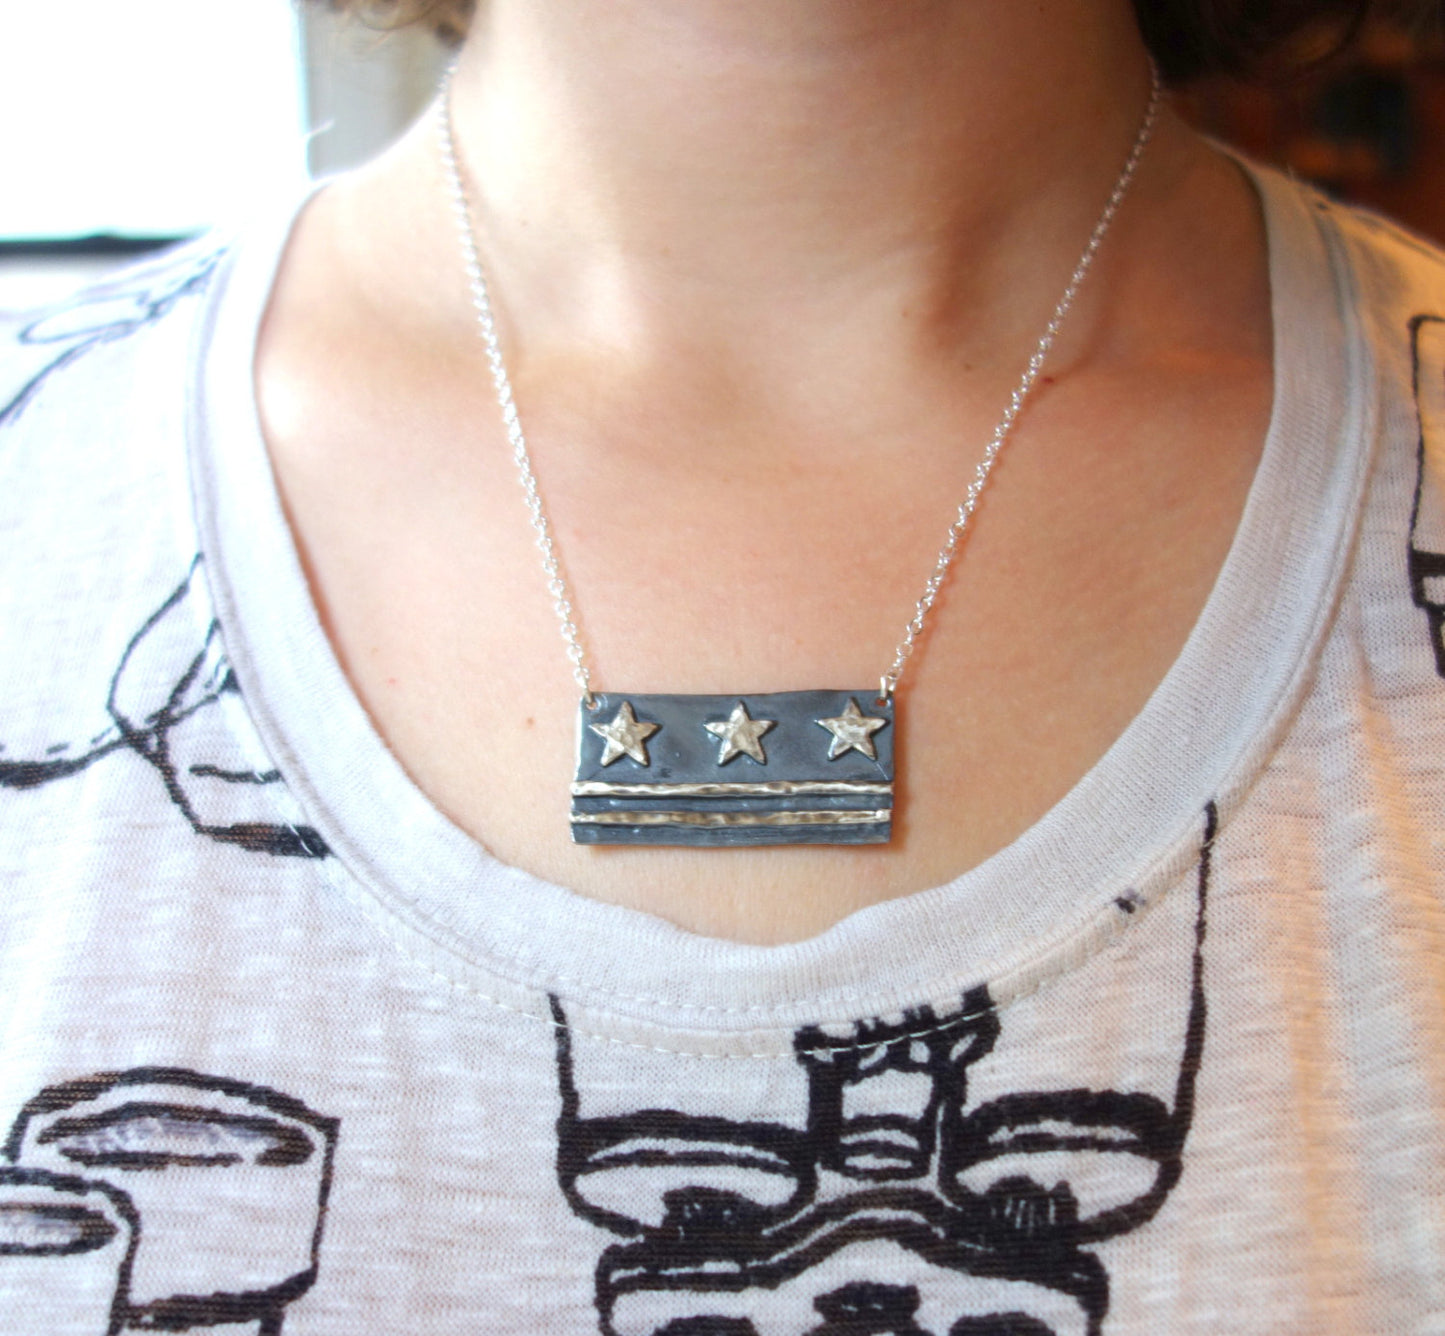 Large DC Flag Necklace in Sterling or Brass